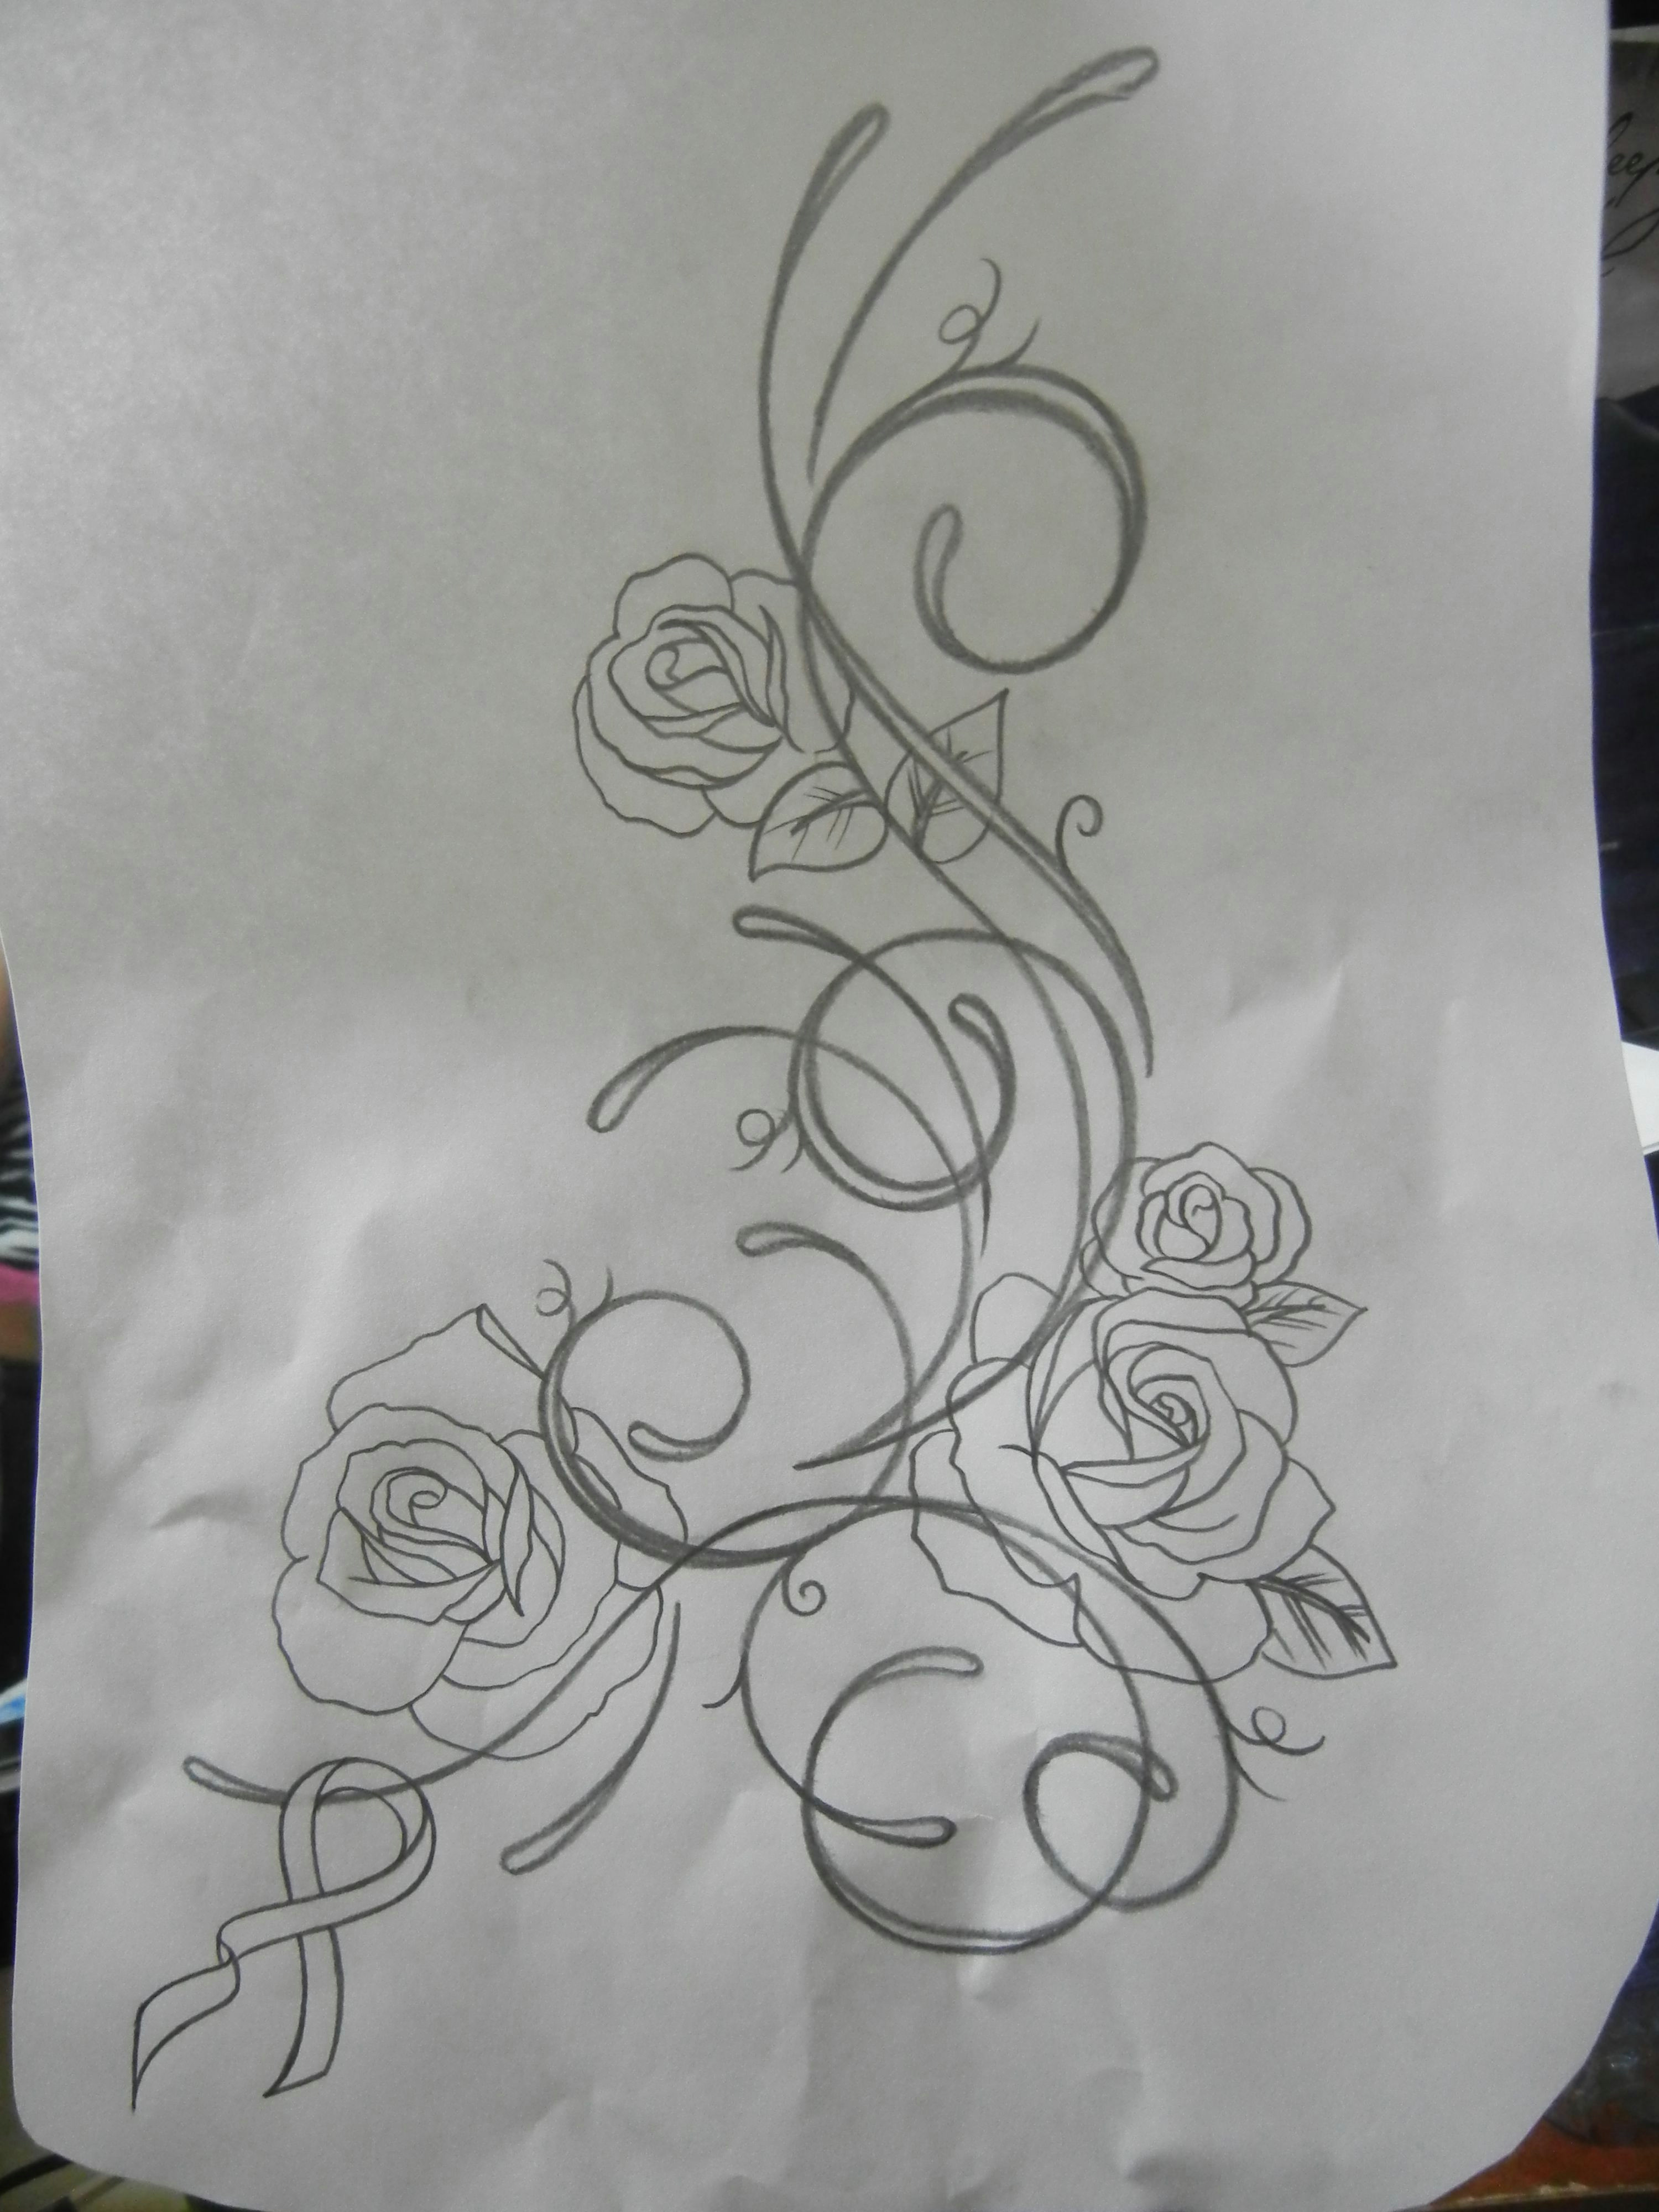 Drawings Of Detailed Roses Tattoo I M Hopefully Getting soon Will Be On My Left Hip N Ribs and